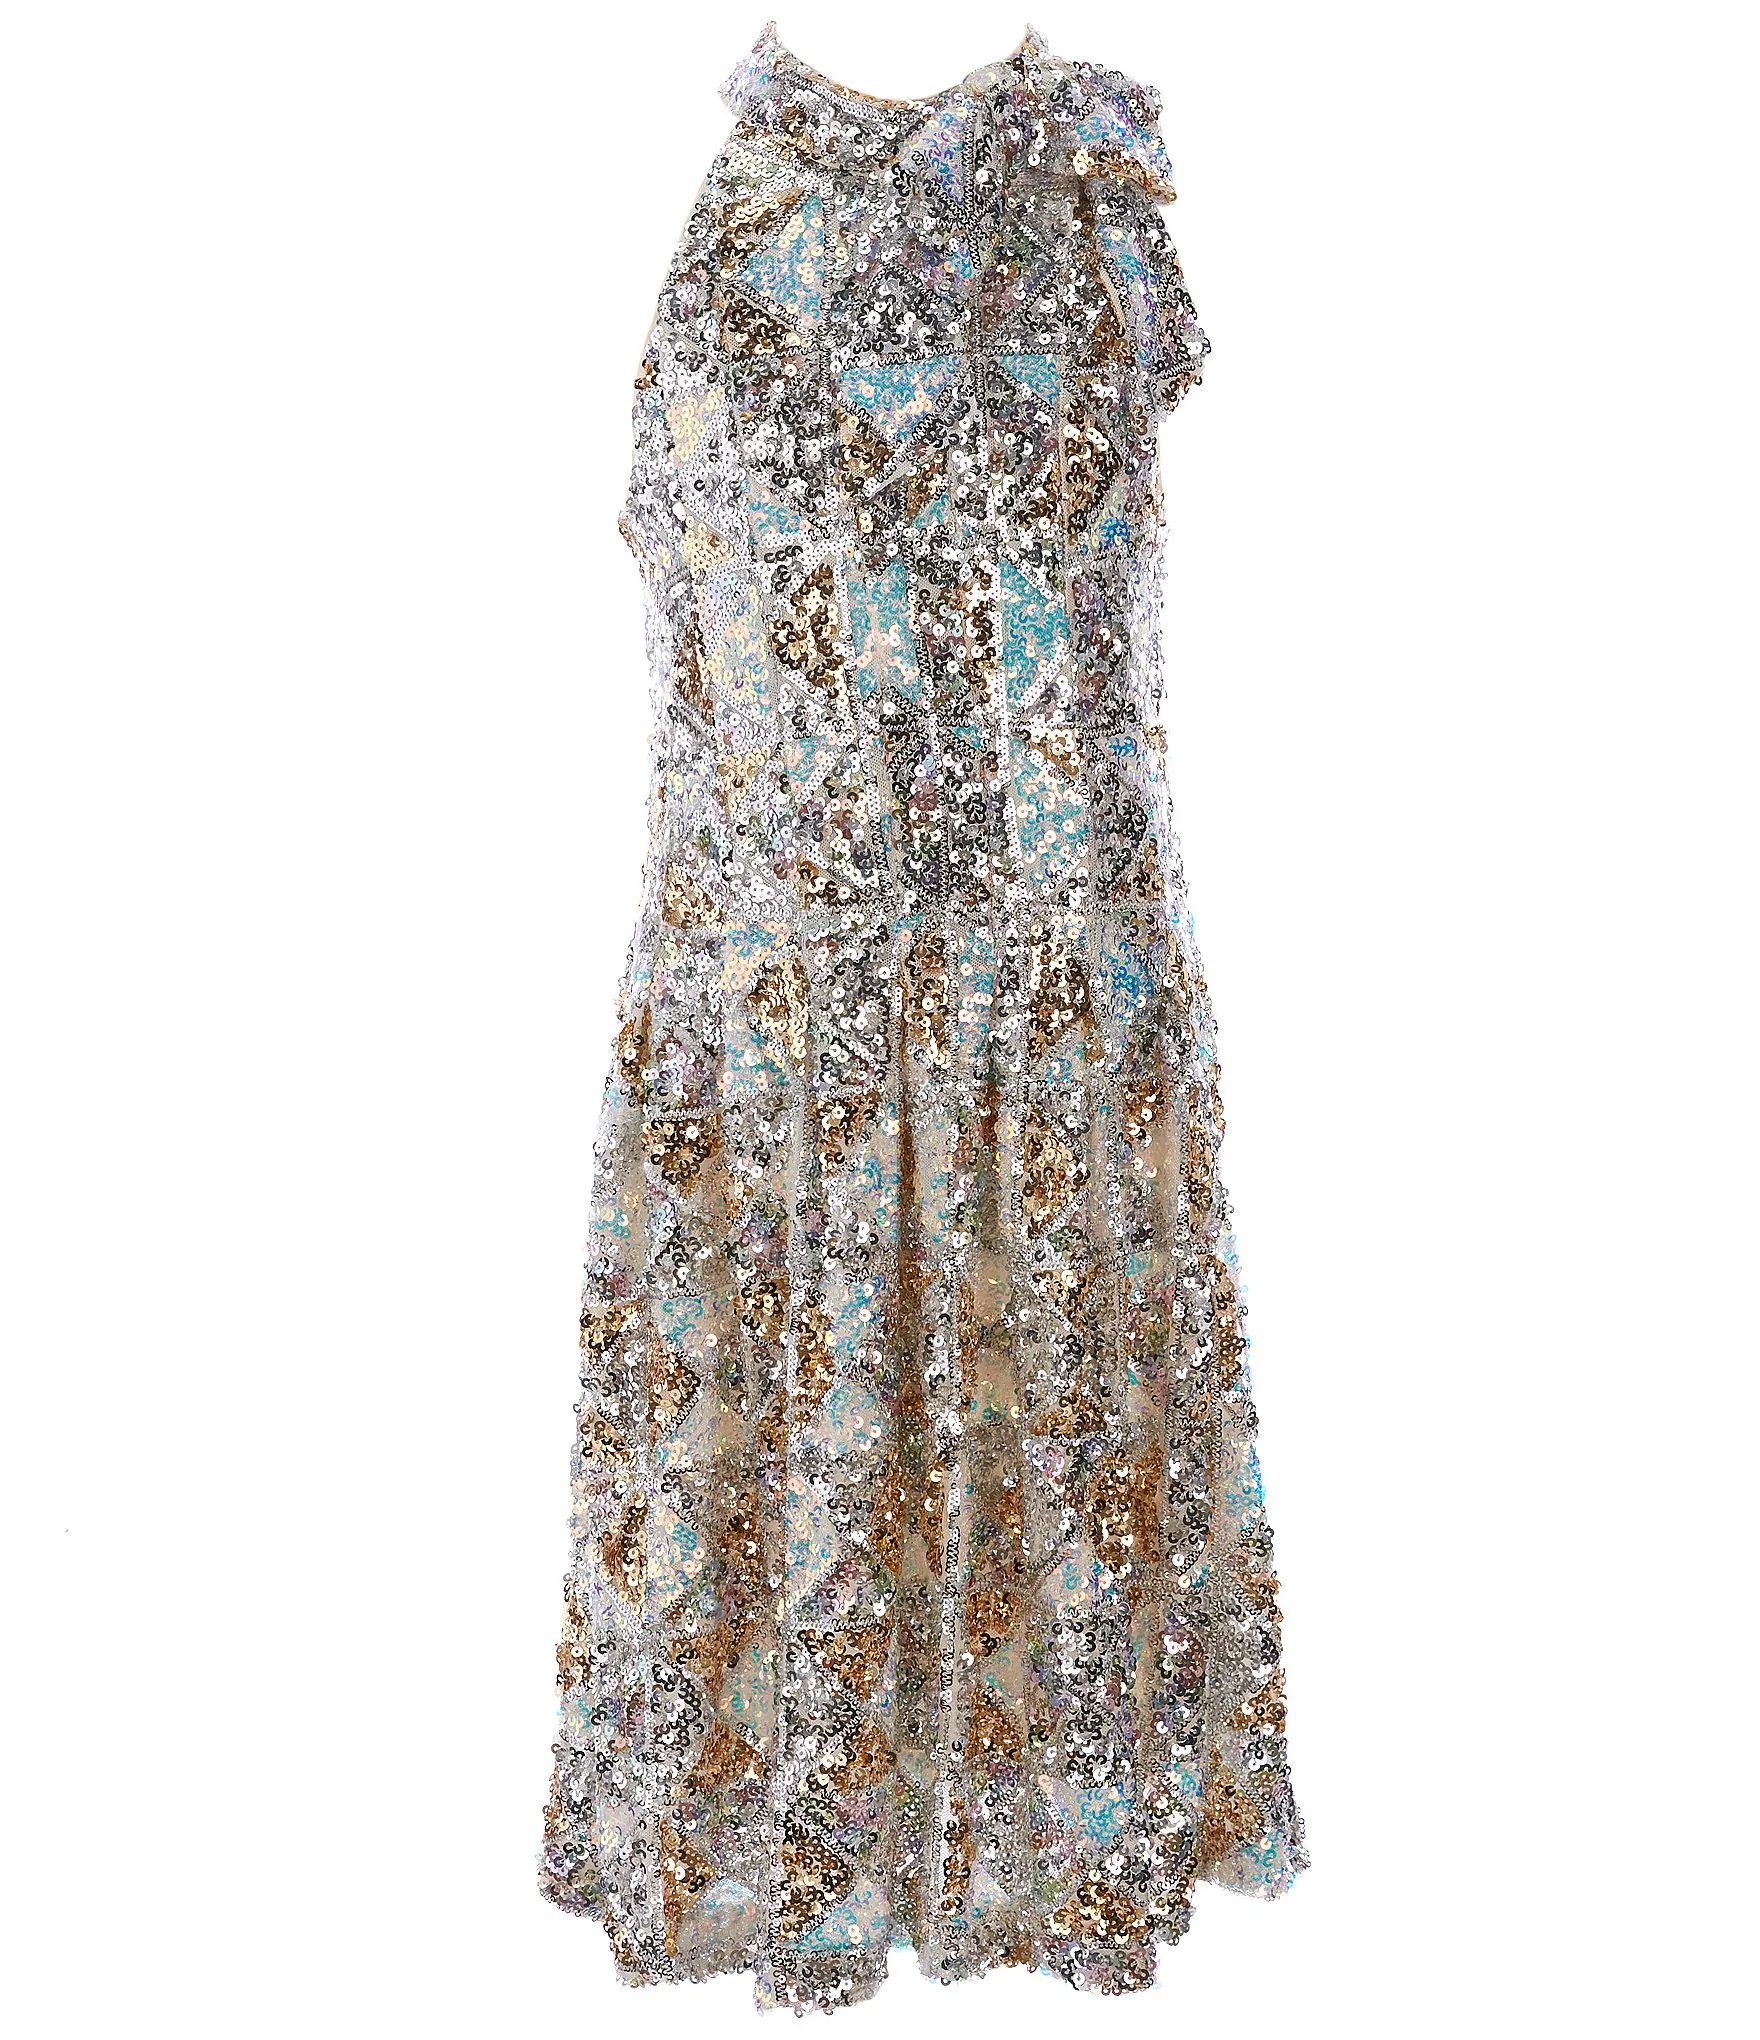 Big Girls 7-16 Sleeveless Halter Bow Neck Sequin Embellished Fit-and-Flare Dress | Dillard's